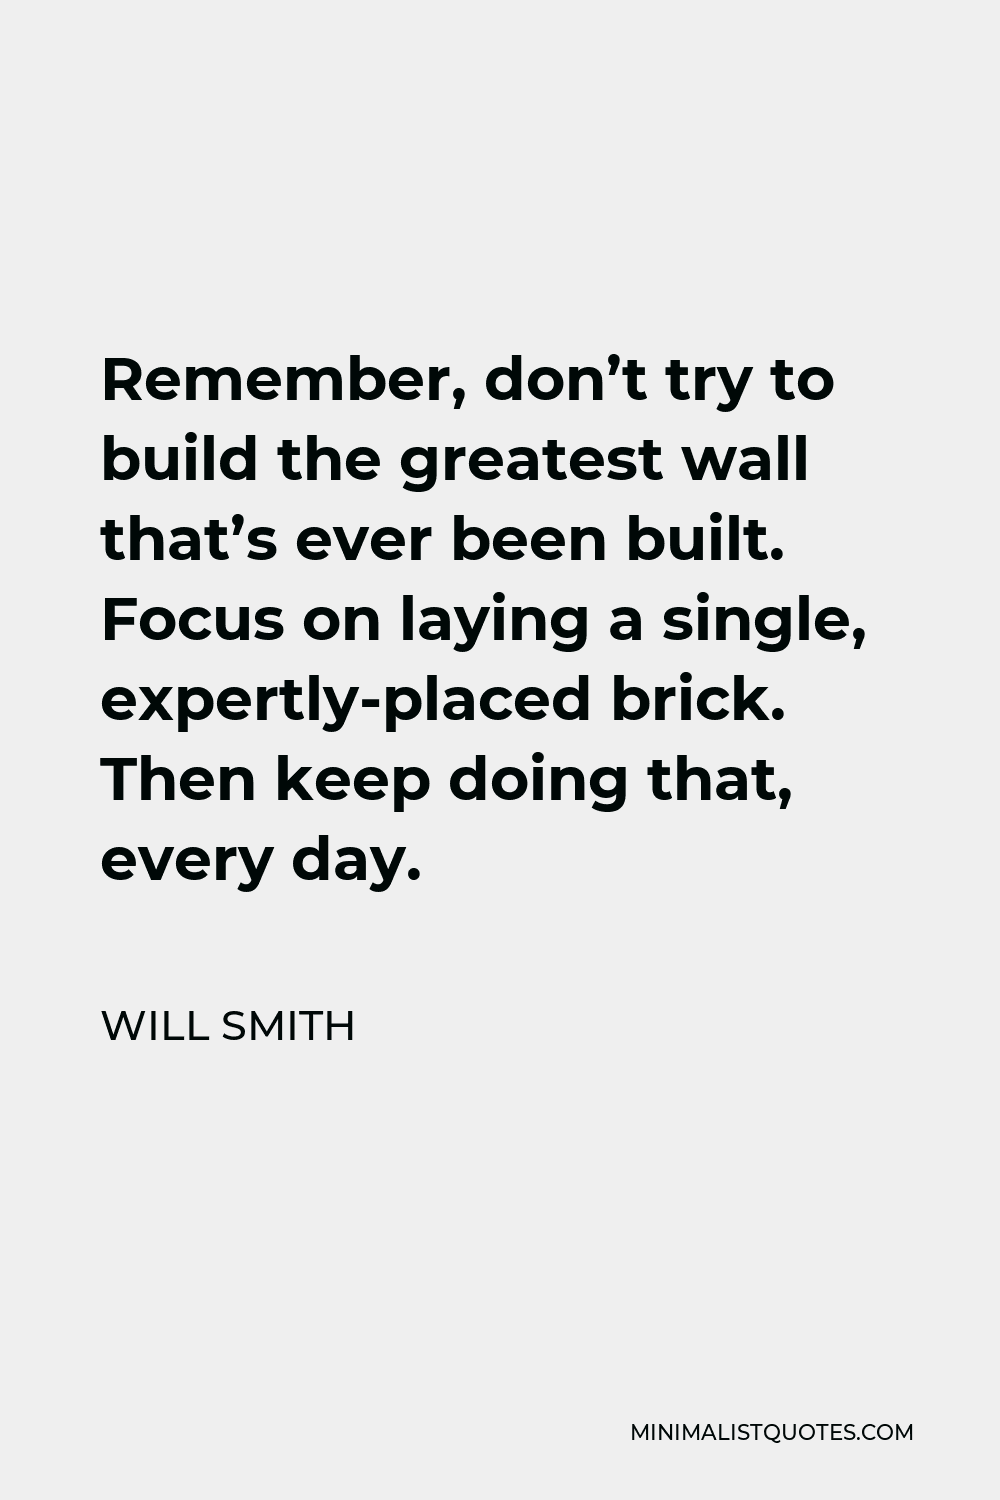 Will Smith Quote - Remember, don’t try to build the greatest wall that’s ever been built. Focus on laying a single, expertly-placed brick. Then keep doing that, every day.